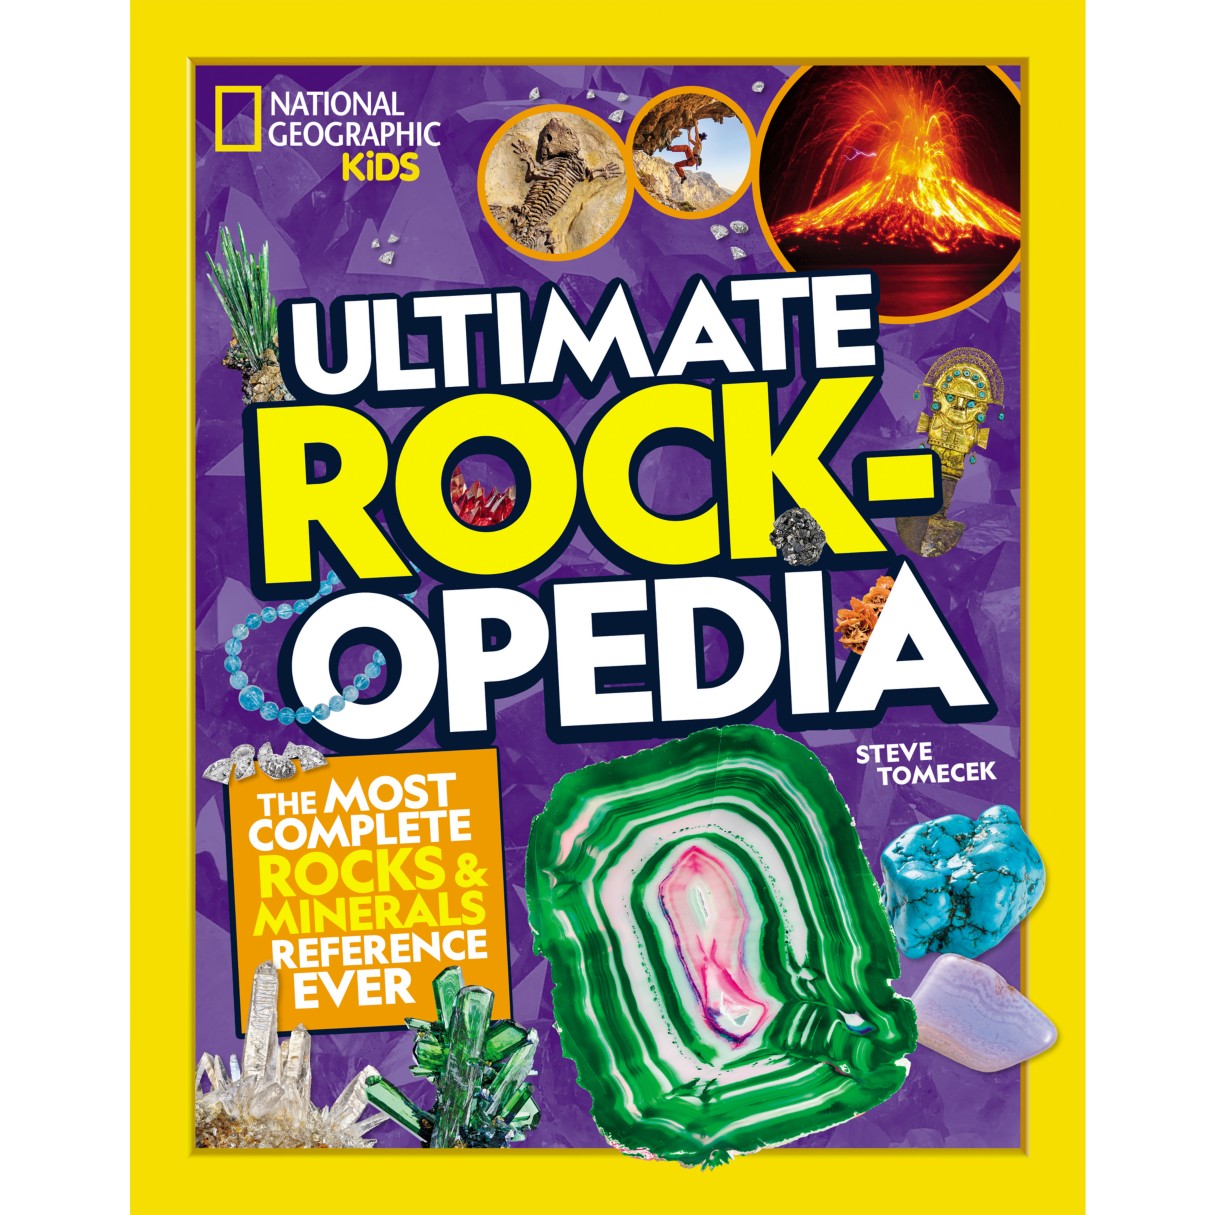 Ultimate Rockopedia: The Most Complete Rocks & Minerals Reference Ever – National Geographic